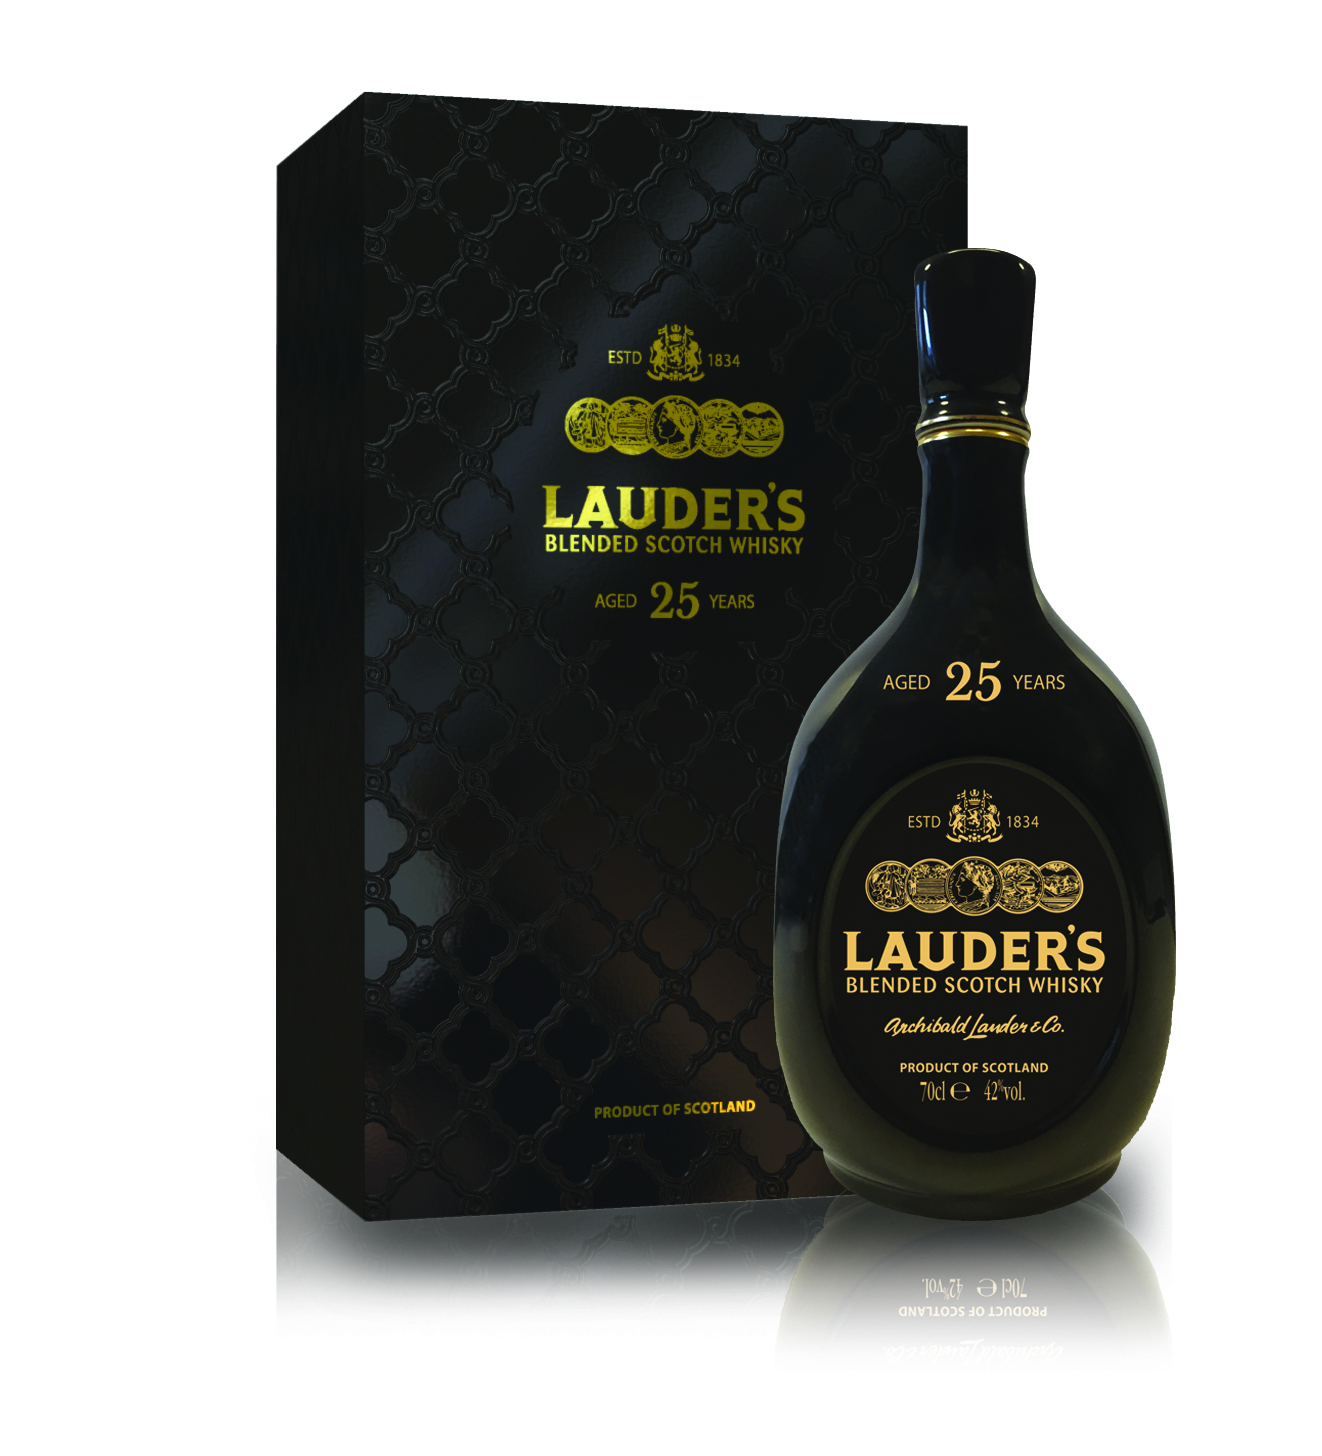 Macduff marks 25th anniversary with limited-edition Lauder's 25yo